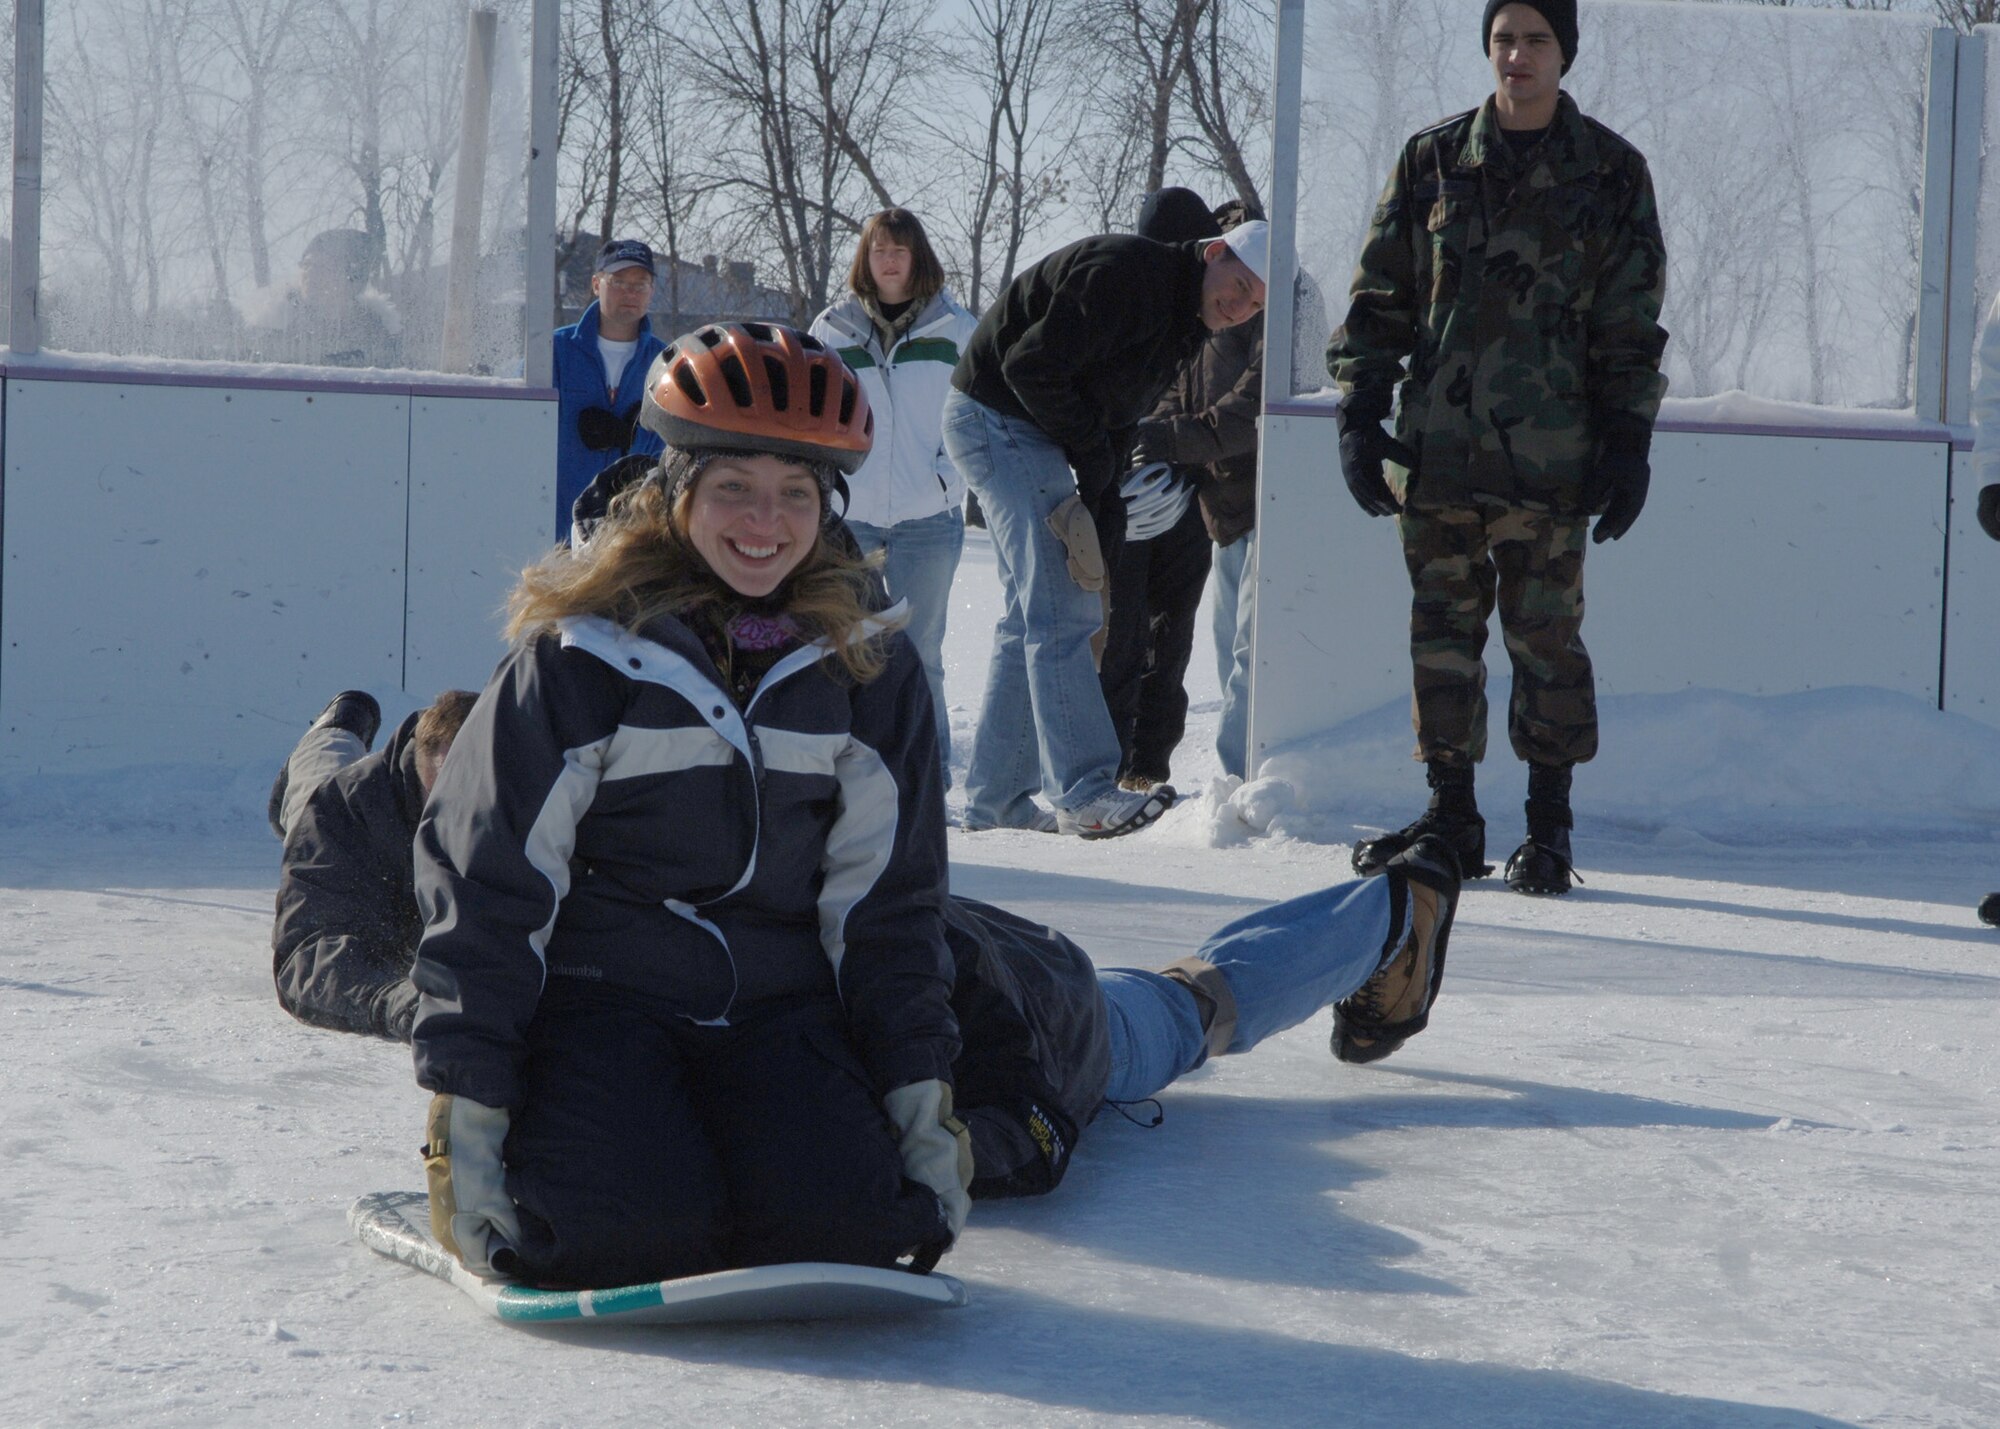 Captain Patrick Kelly and 1st Lieutenant Colby Arends, both 319th Communications Squadron, give 2nd Lieutenant Christine Williams a push during the Winter Bash?s human curling event on the ice rink. The teams were composed of three people and were judged by which team was able to push their person on the sled the furthest. (U.S. Air Force photo/Senior Airman Tiffany Colburn)



